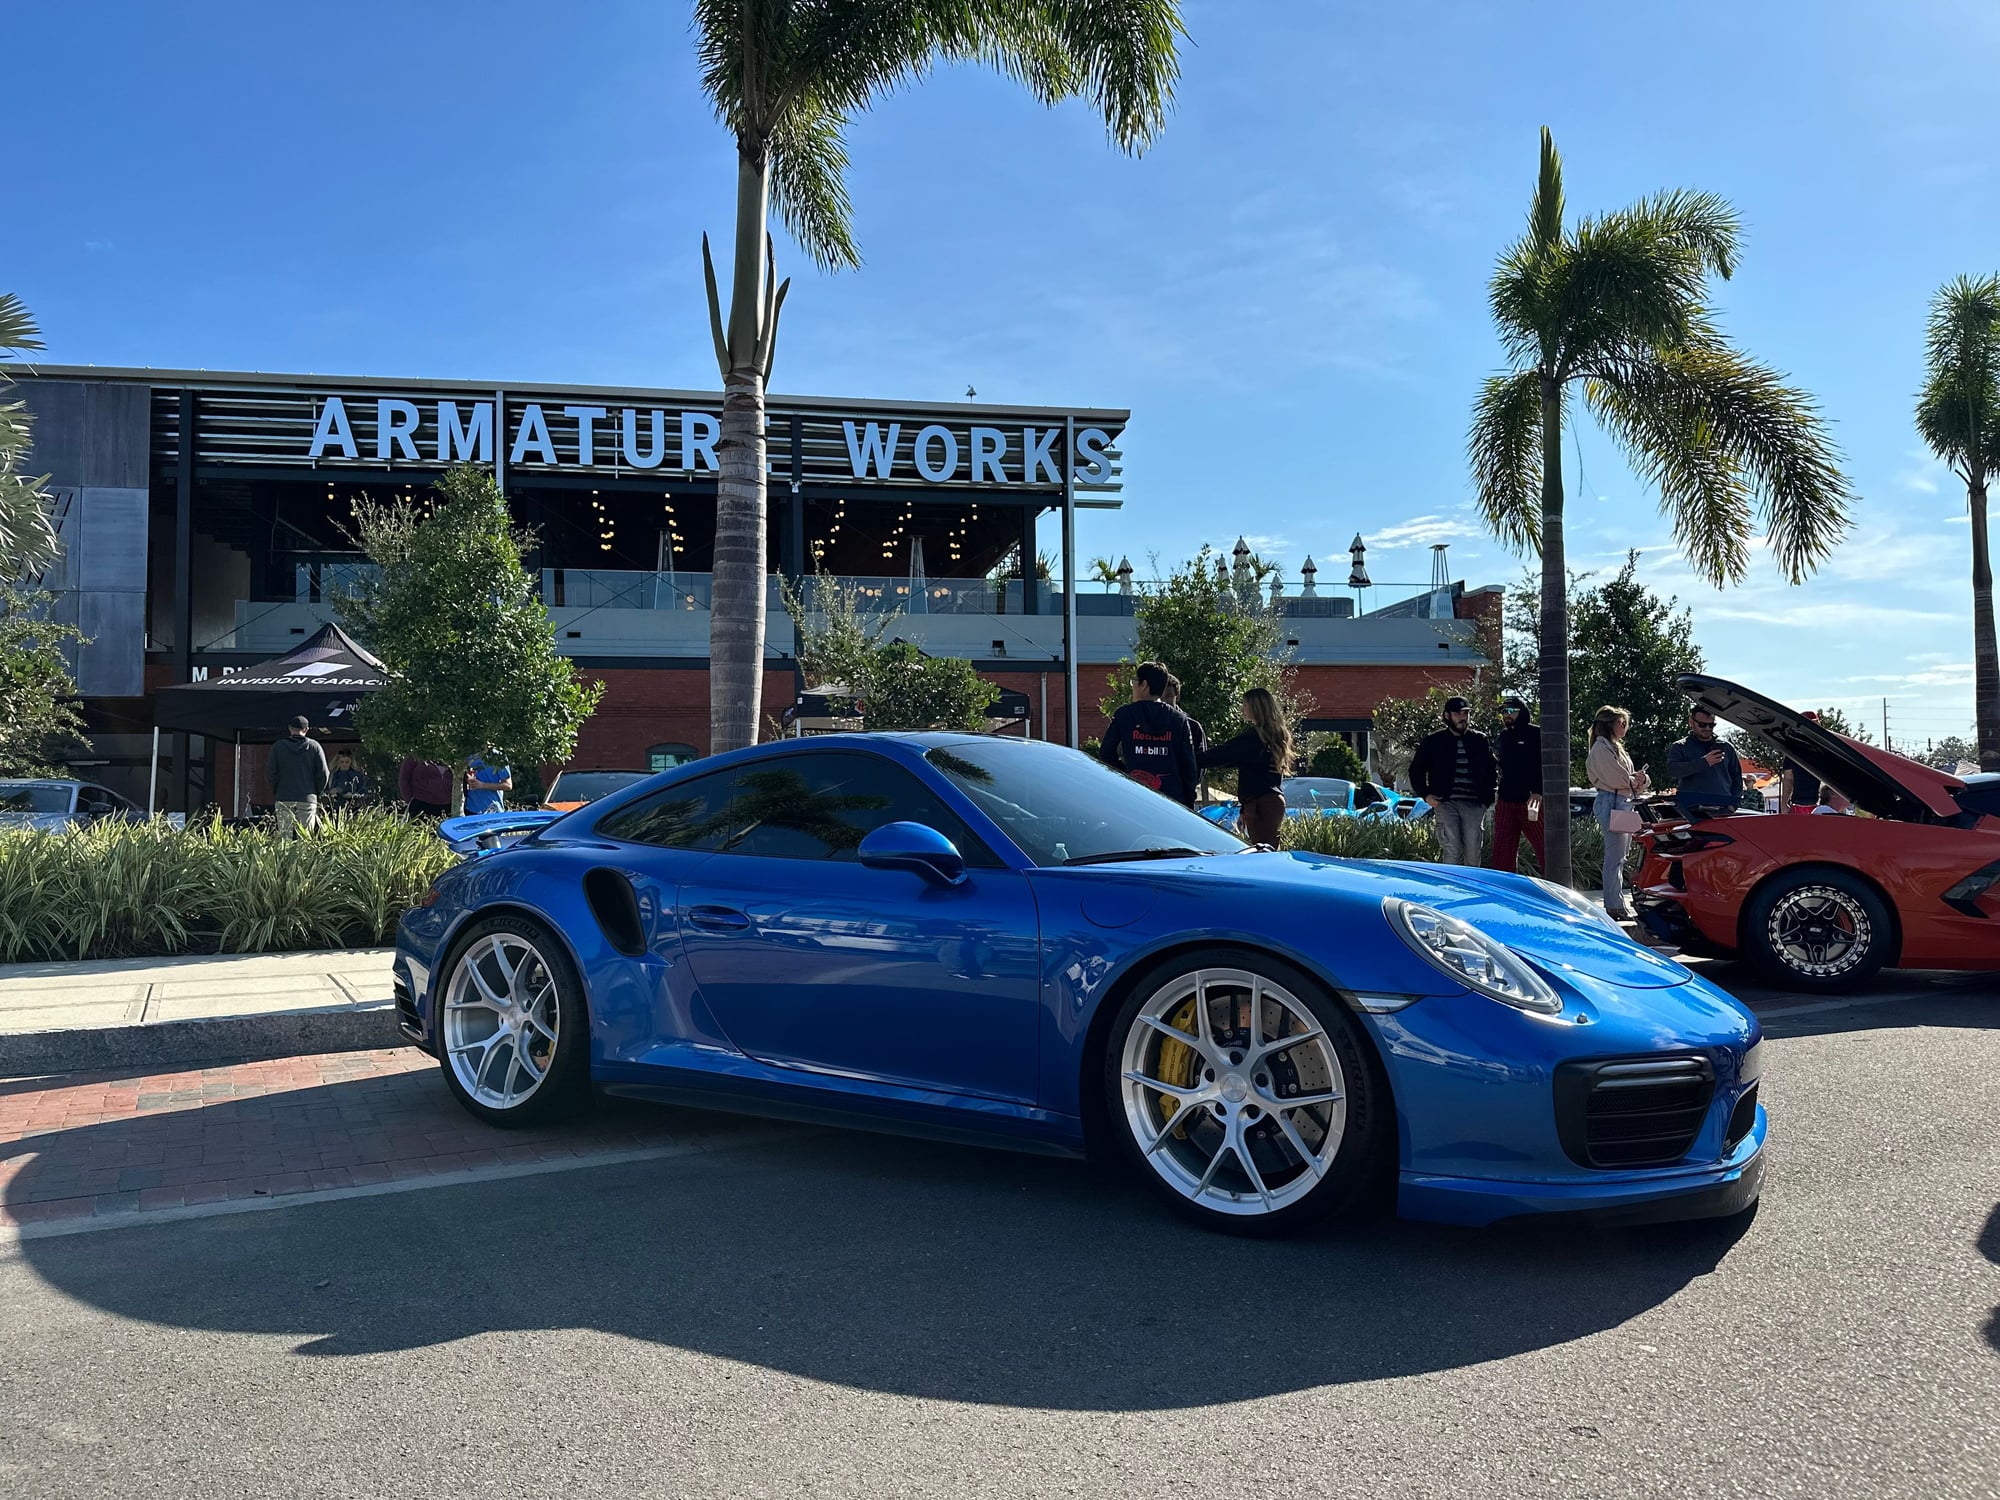 2017 Porsche 911 - 2017 911 Turbo S - Tastefully Modded - Dialed in - Transferable Warranty - Used - Tampa, FL 33637, United States